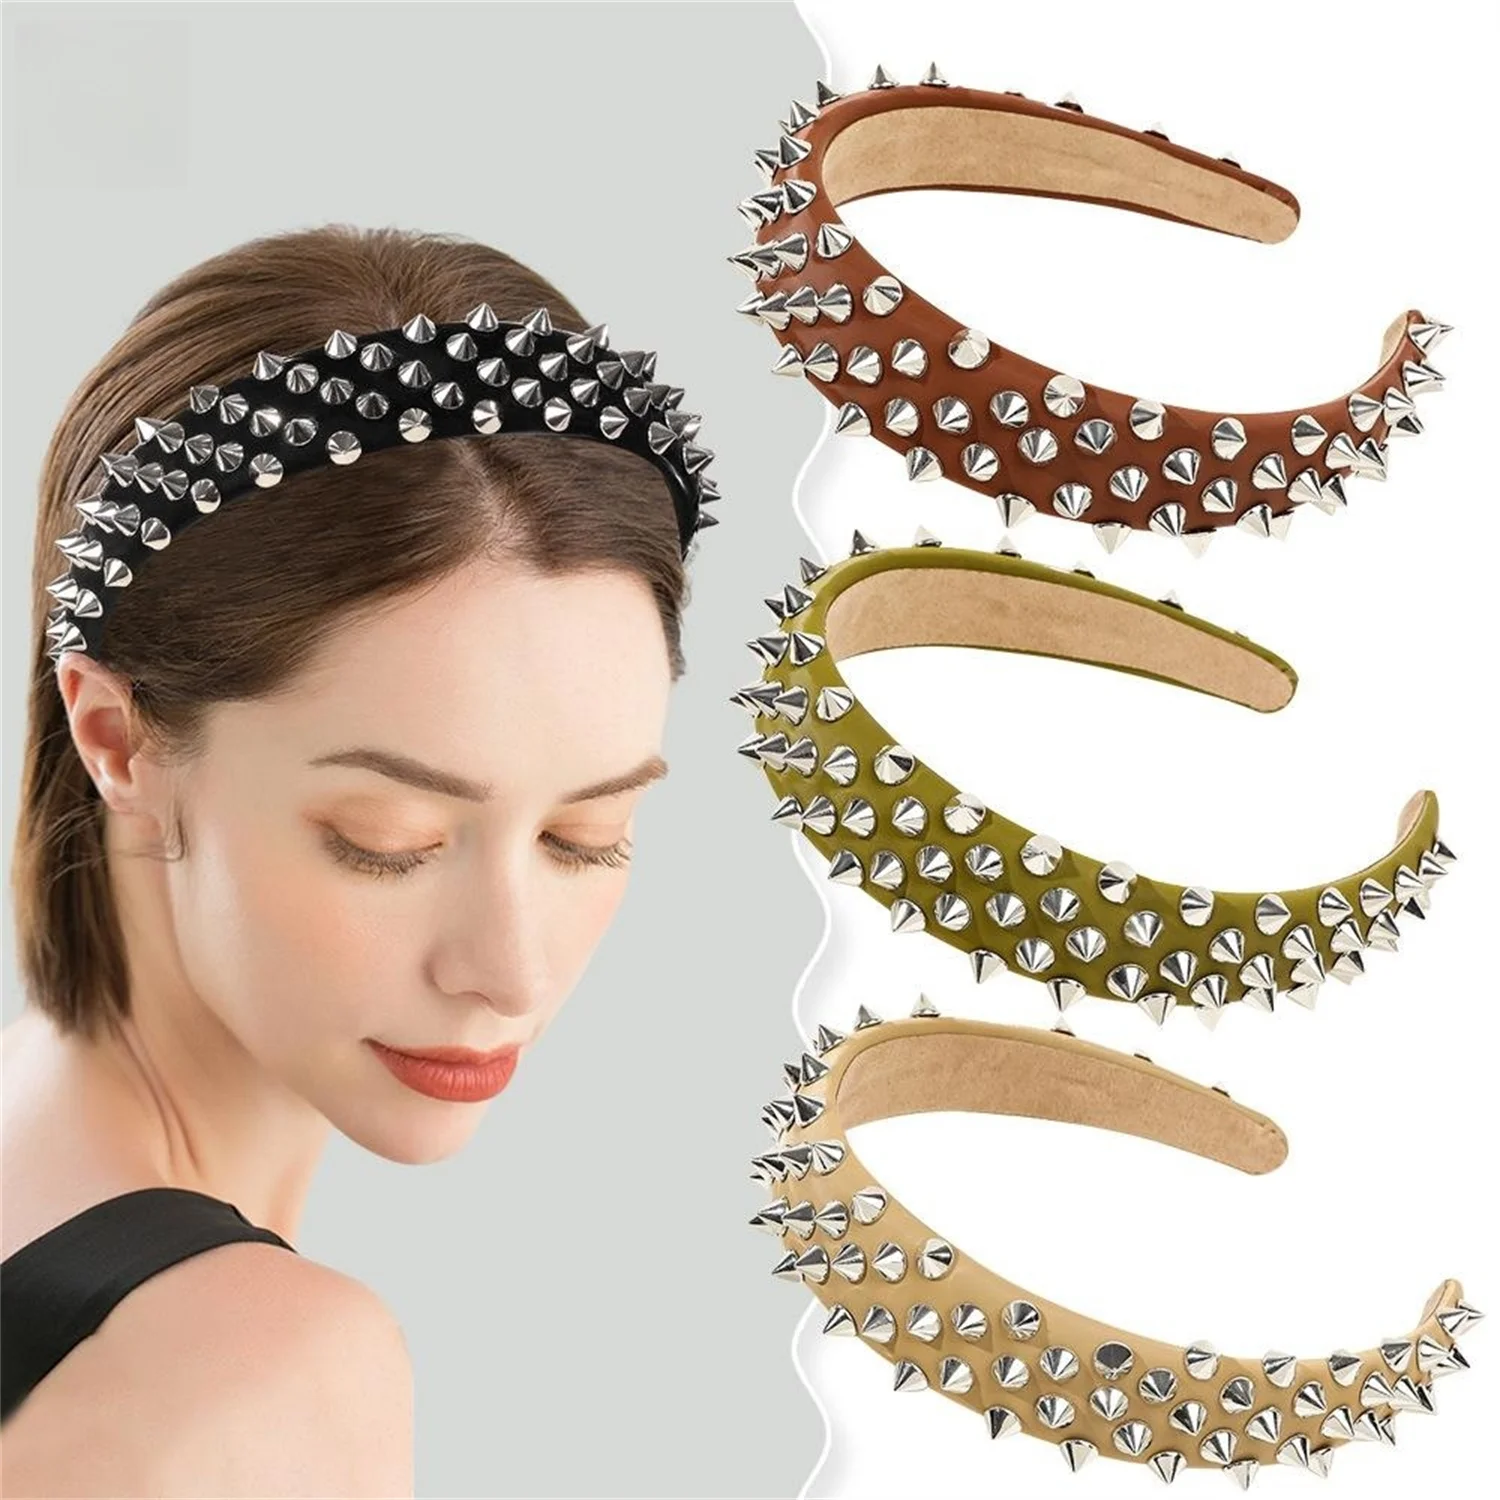 

New Korean Fashion Simple Pure Color Rivet Headbands For Women Retro Knotting Hairbands Hair Accessories Hair Hoop Girls